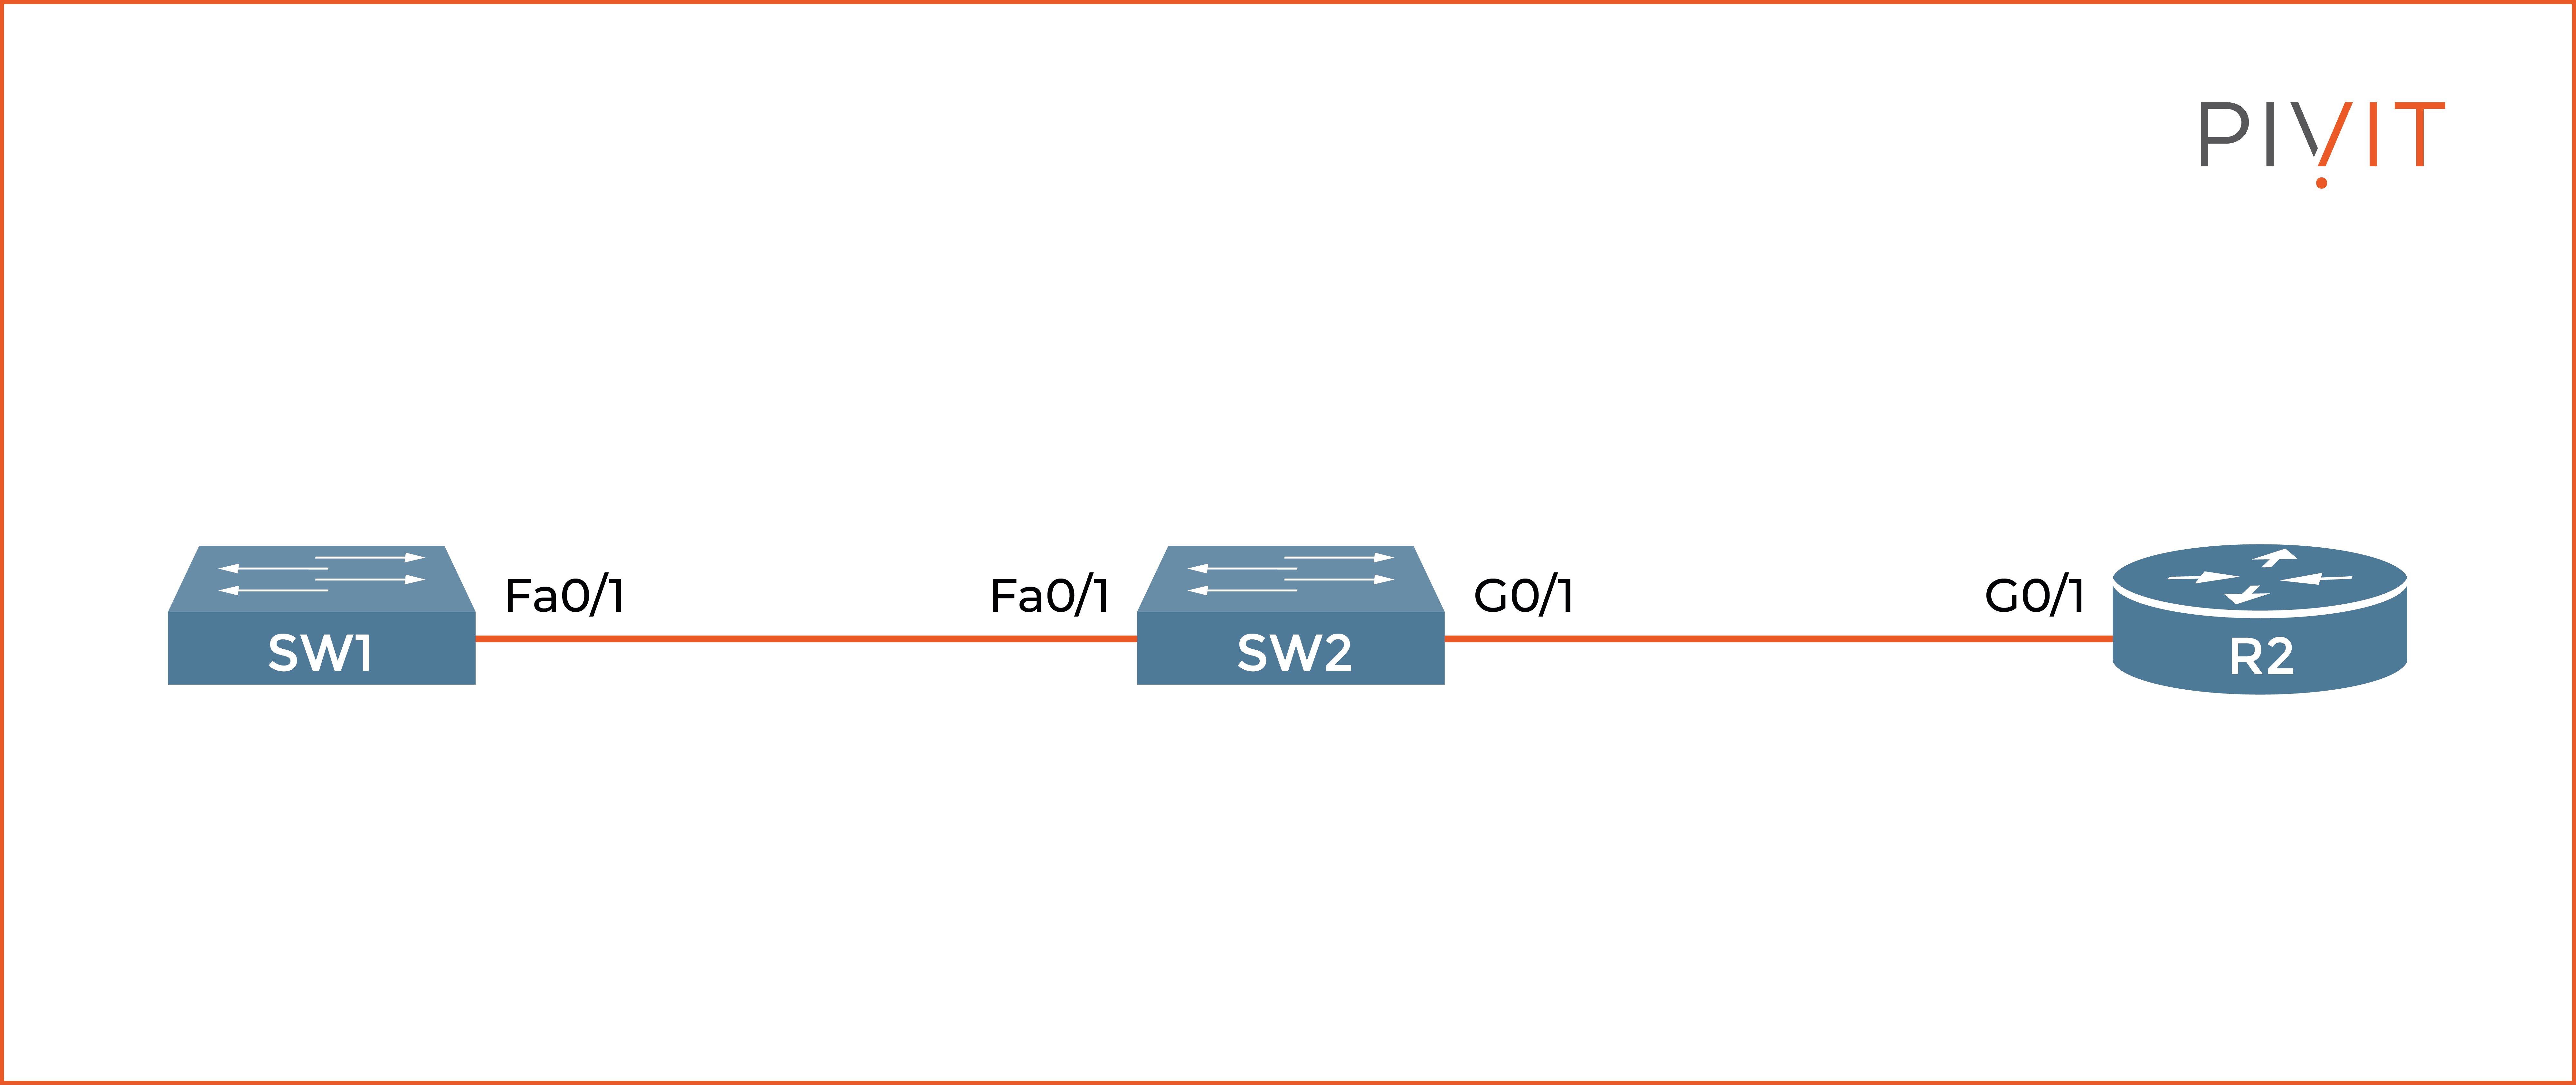 Network topology consists of two Cisco switches and one Cisco router